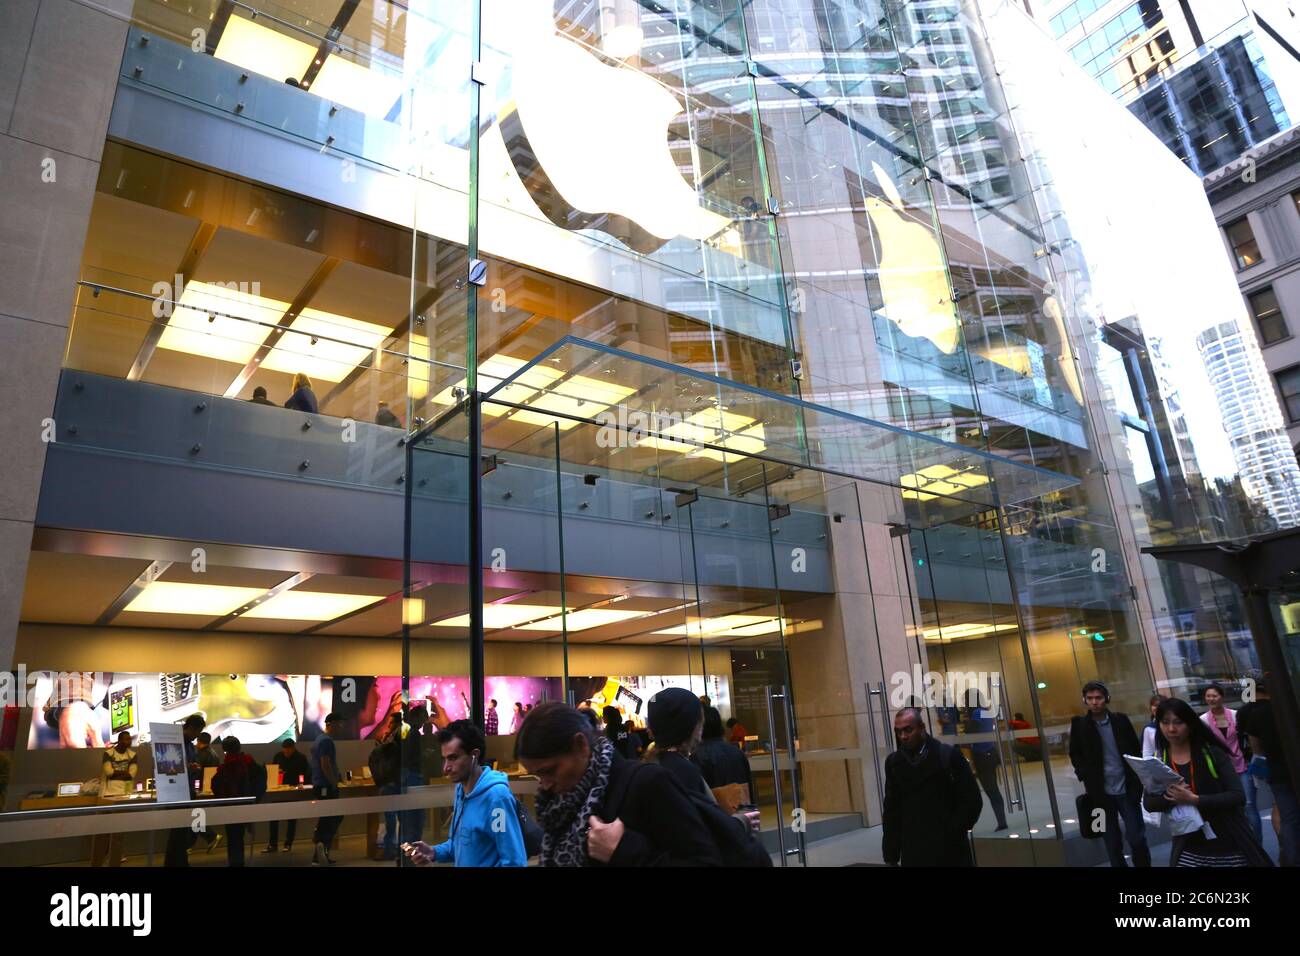 The flagship Apple store on George Street, Sydney on the evening of Monday, 8 August 2014. Stock Photo